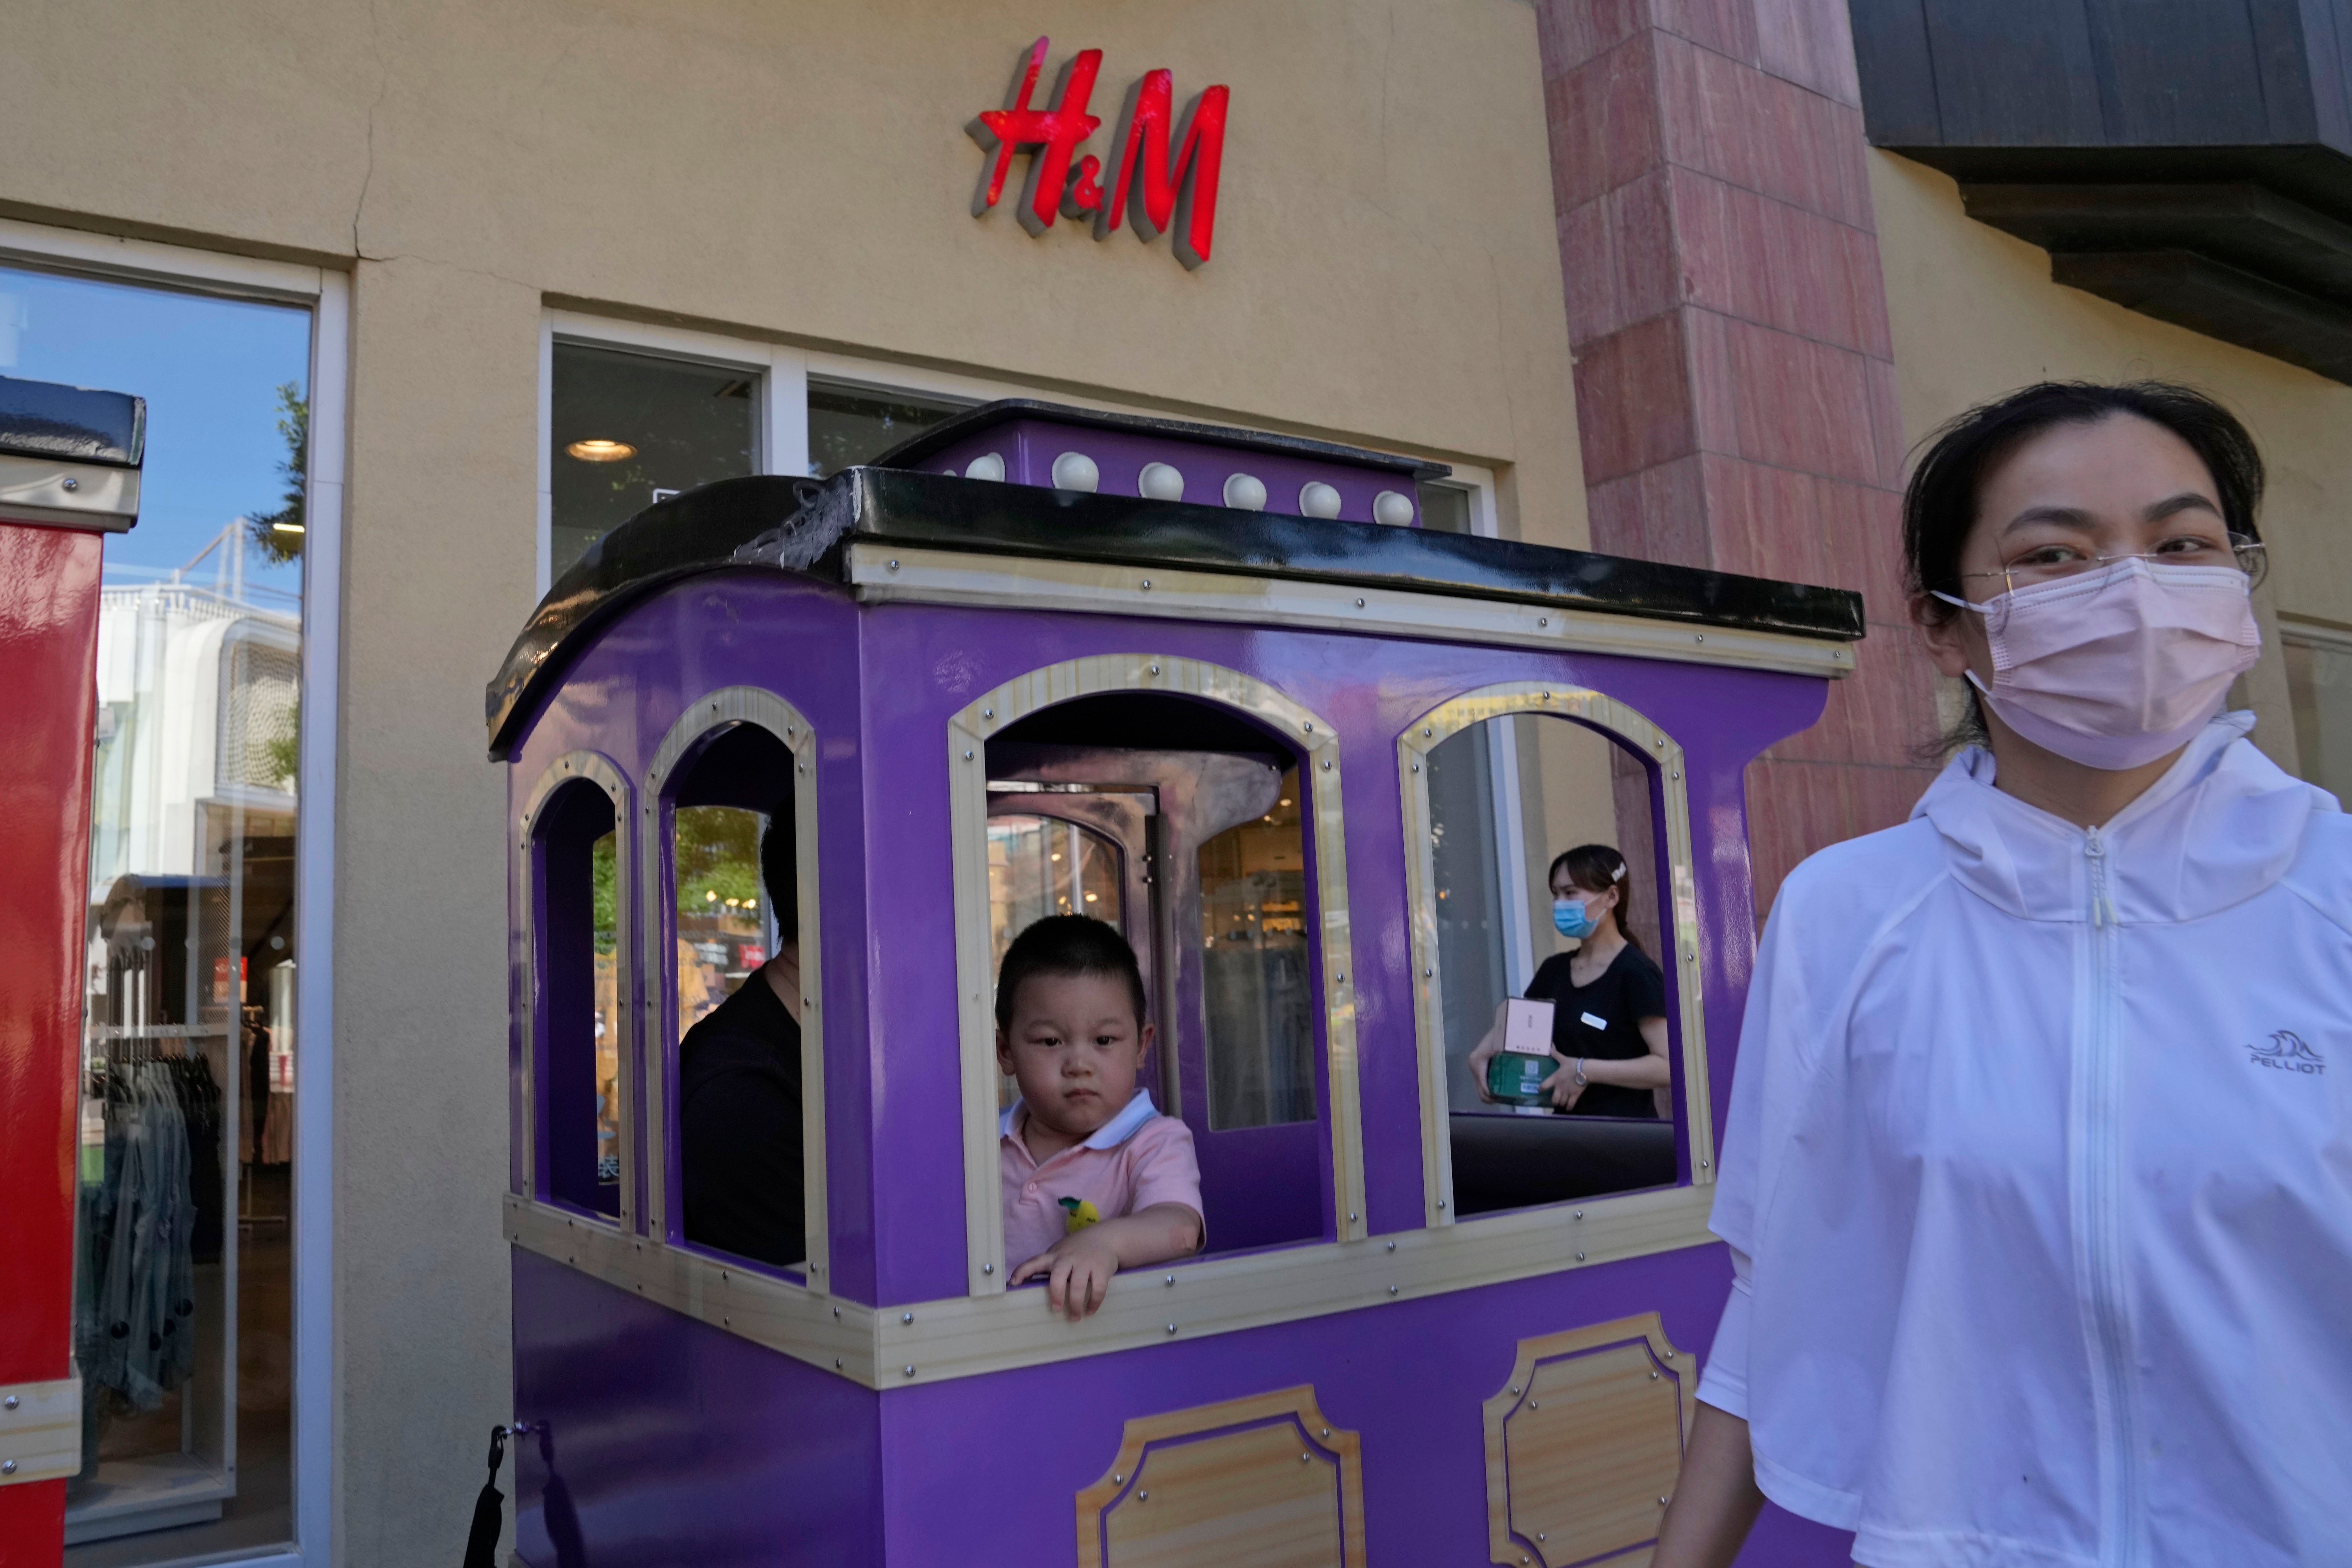 China criticizes Western brands' toys, as unsafe China Adidas Beijing Xinjiang | The Independent